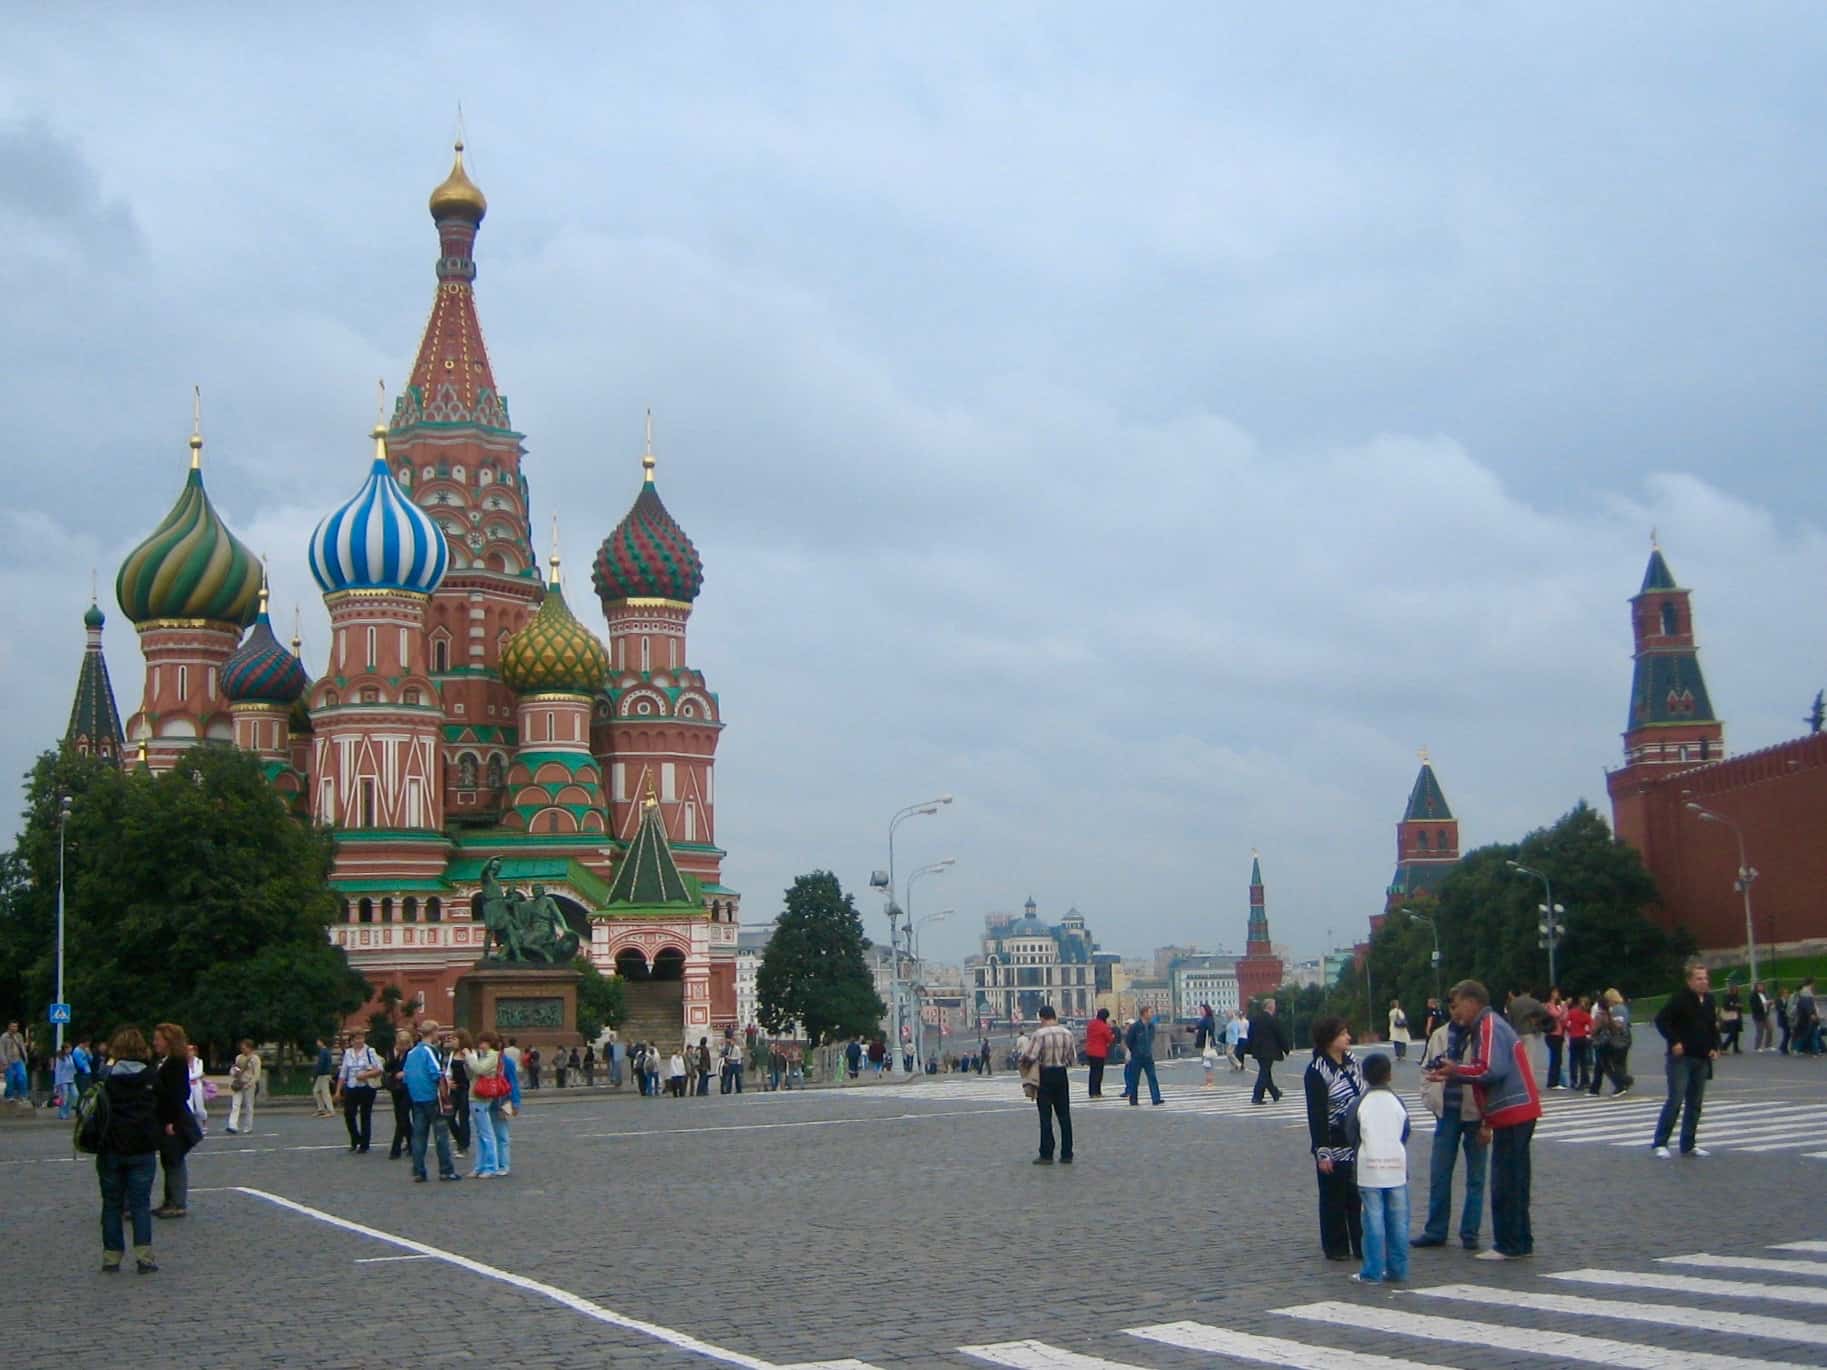 Red Square in Moscow, Russia, is one of my recommended top places to visit after COVID-19